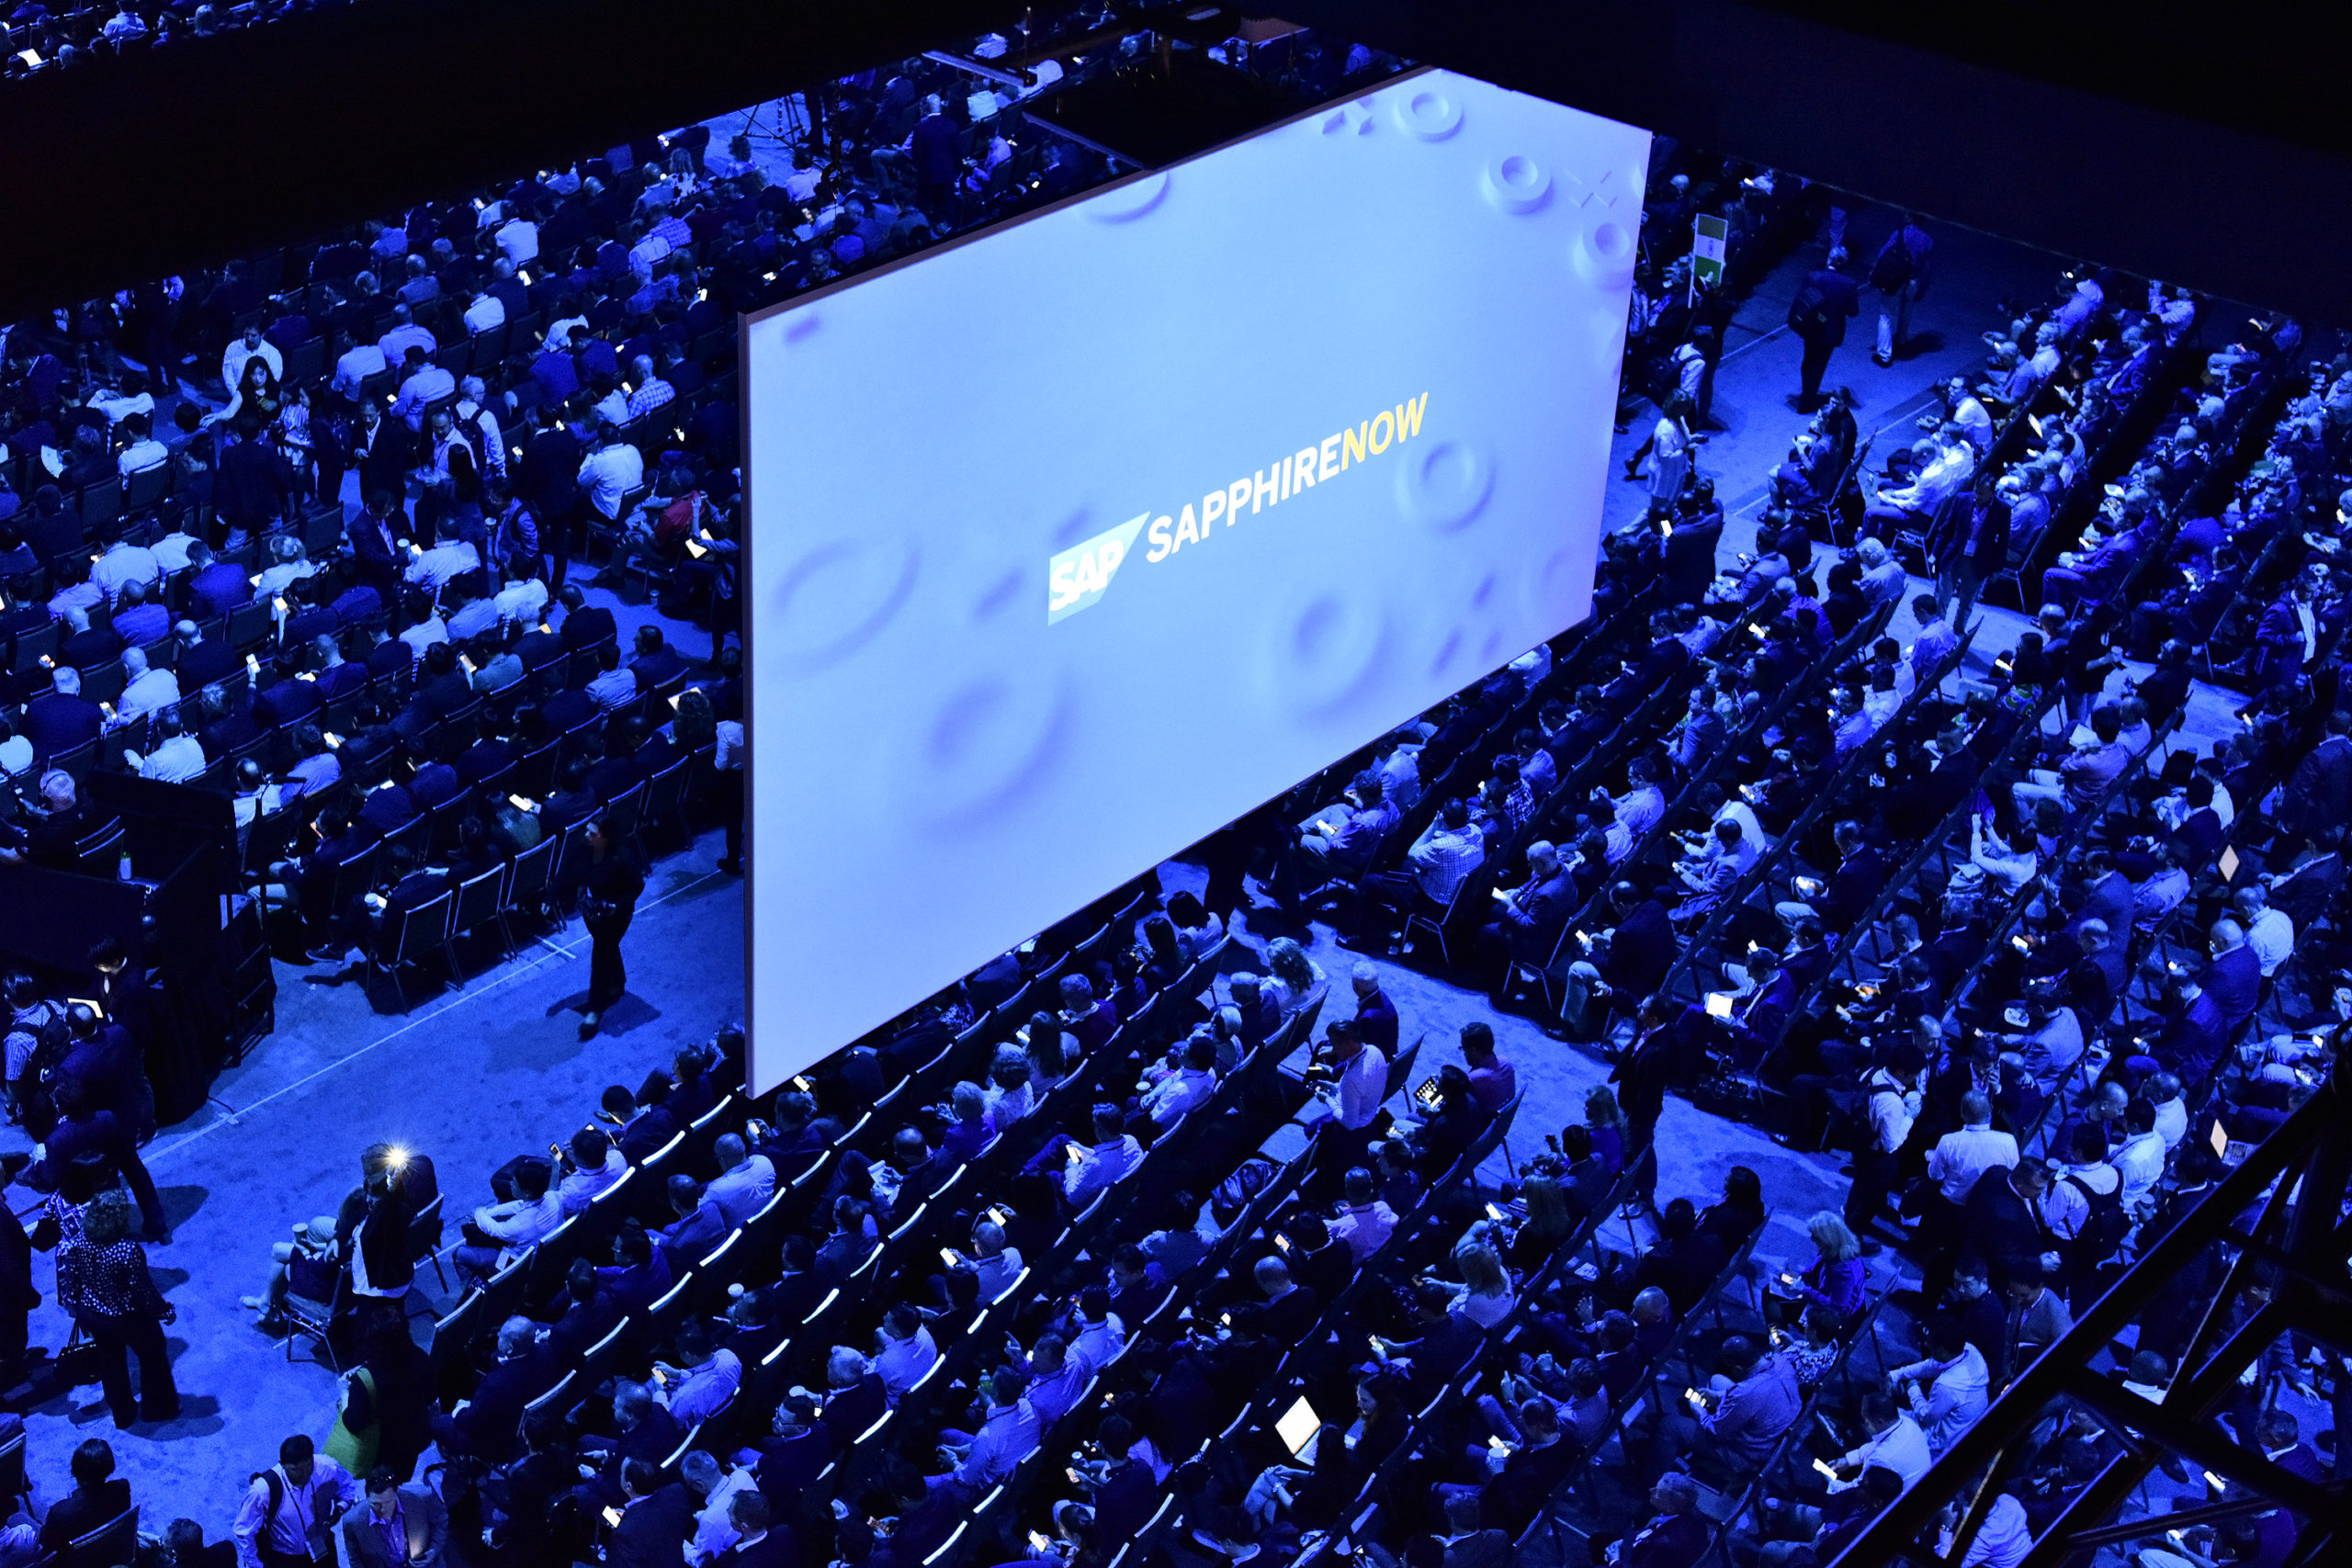 SAP and Microsoft Embrace program announced at SAP Sapphire Now 2019